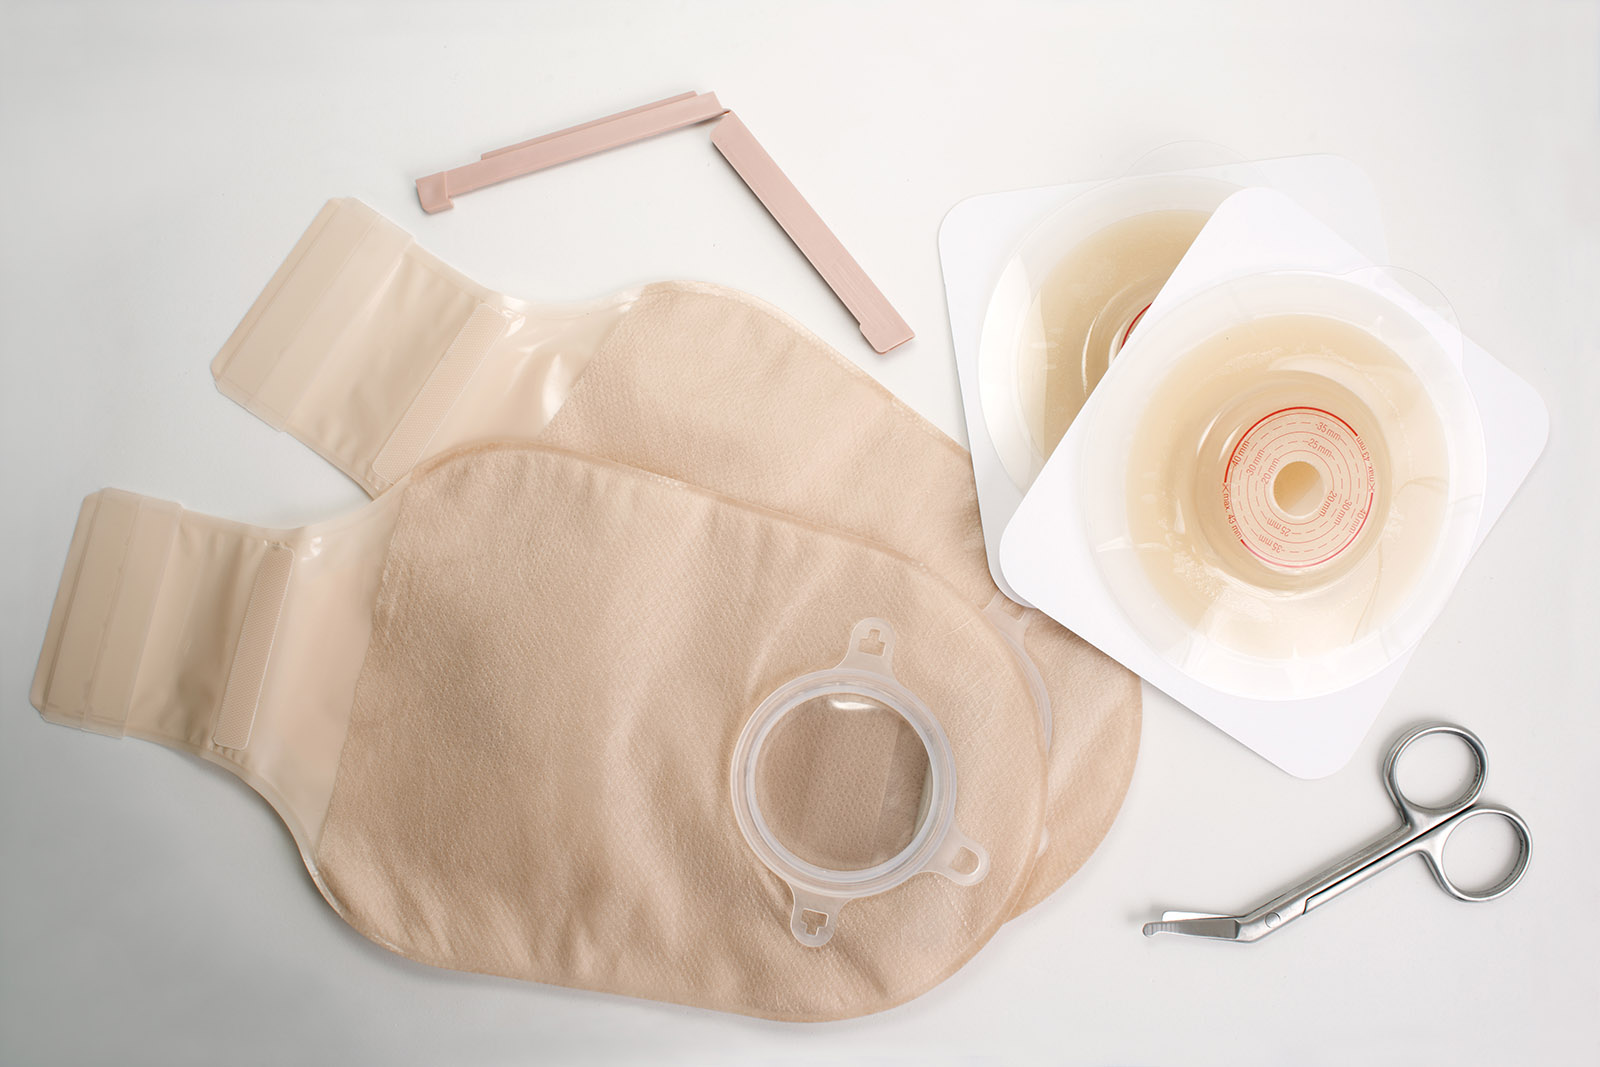 Buy Ostomy Supplies, Ostomy Pouches & Barriers at Medical Monks